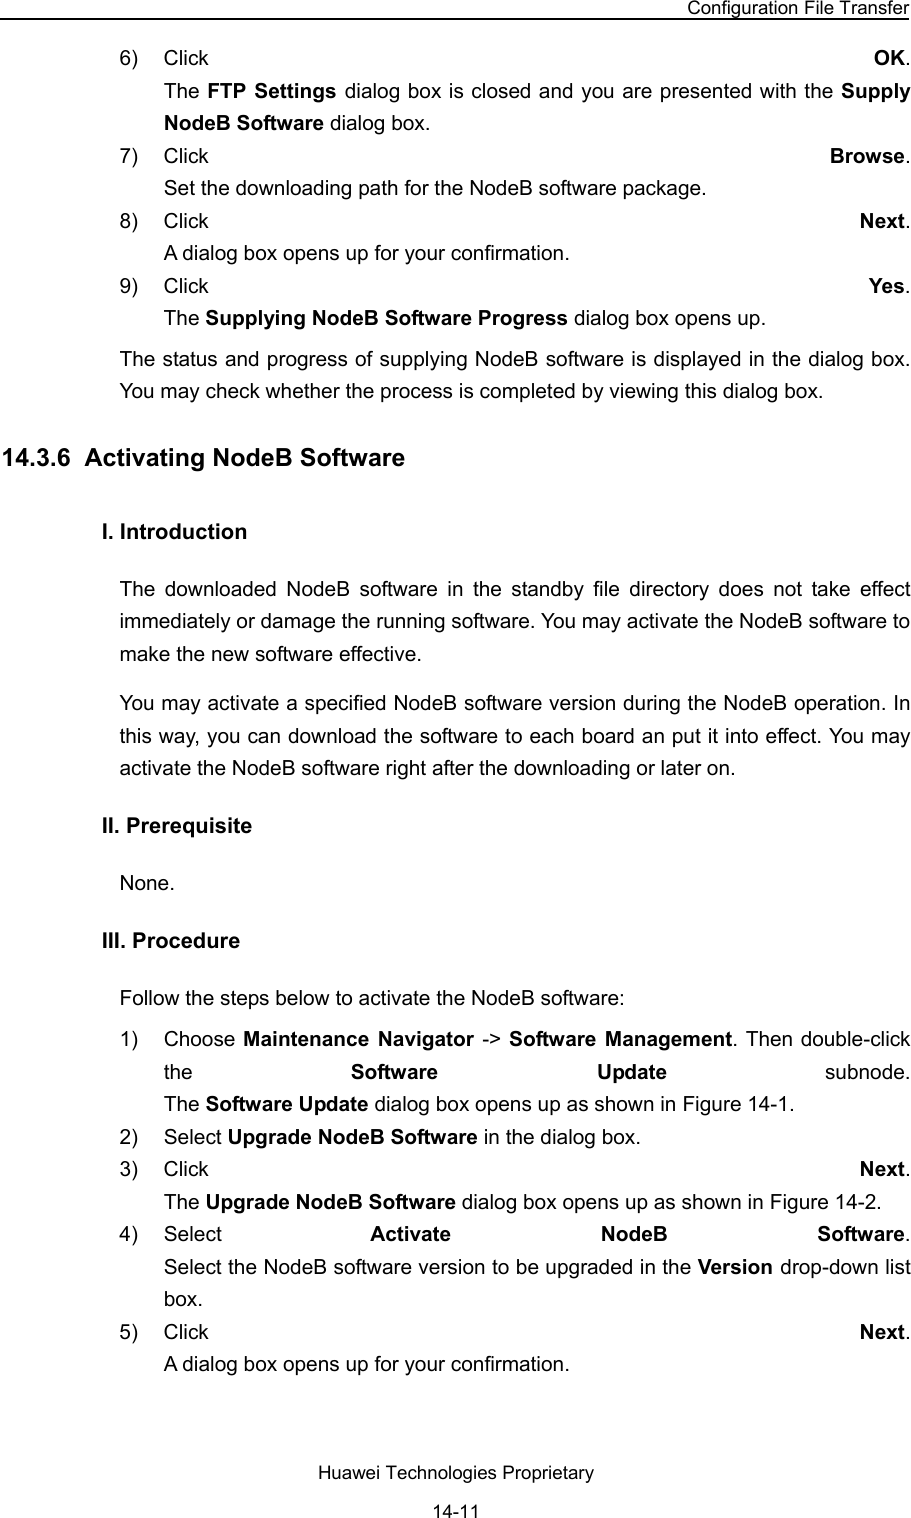 NodeB LMT User Guide Chapter 14  NodeB Software Update and Data Configuration File Transfer Huawei Technologies Proprietary 14-11 6) Click  OK.  The FTP Settings dialog box is closed and you are presented with the Supply NodeB Software dialog box. 7) Click  Browse.  Set the downloading path for the NodeB software package.  8) Click  Next.  A dialog box opens up for your confirmation. 9) Click  Yes.  The Supplying NodeB Software Progress dialog box opens up. The status and progress of supplying NodeB software is displayed in the dialog box. You may check whether the process is completed by viewing this dialog box. 14.3.6  Activating NodeB Software I. Introduction  The downloaded NodeB software in the standby file directory does not take effect immediately or damage the running software. You may activate the NodeB software to make the new software effective.  You may activate a specified NodeB software version during the NodeB operation. In this way, you can download the software to each board an put it into effect. You may activate the NodeB software right after the downloading or later on.   II. Prerequisite None.  III. Procedure Follow the steps below to activate the NodeB software:  1) Choose Maintenance Navigator -&gt; Software Management. Then double-click the  Software Update subnode.  The Software Update dialog box opens up as shown in Figure 14-1. 2) Select Upgrade NodeB Software in the dialog box.  3) Click  Next.  The Upgrade NodeB Software dialog box opens up as shown in Figure 14-2. 4) Select  Activate NodeB Software.  Select the NodeB software version to be upgraded in the Version drop-down list box.  5) Click  Next.  A dialog box opens up for your confirmation.  